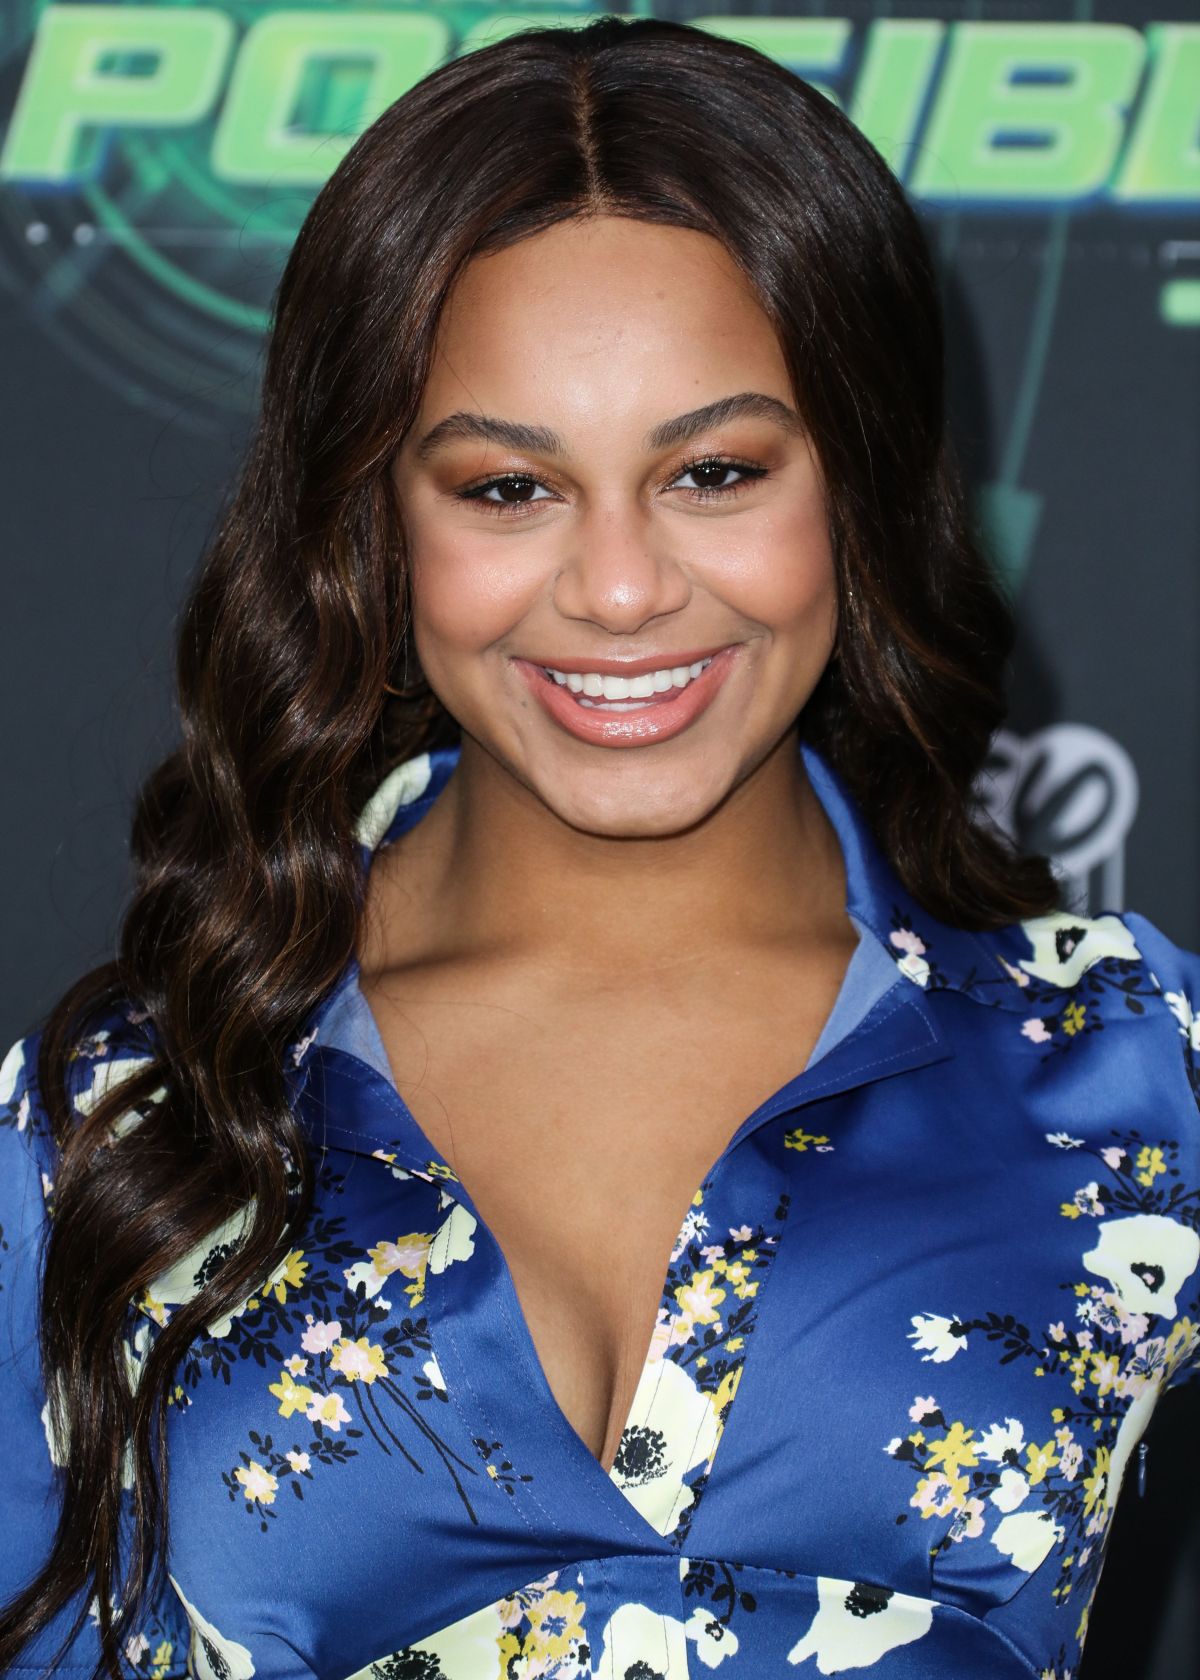 NIA SIOUX at Kim Possible Premiere in Los Angeles 02/12/2019 – HawtCelebs1200 x 1680